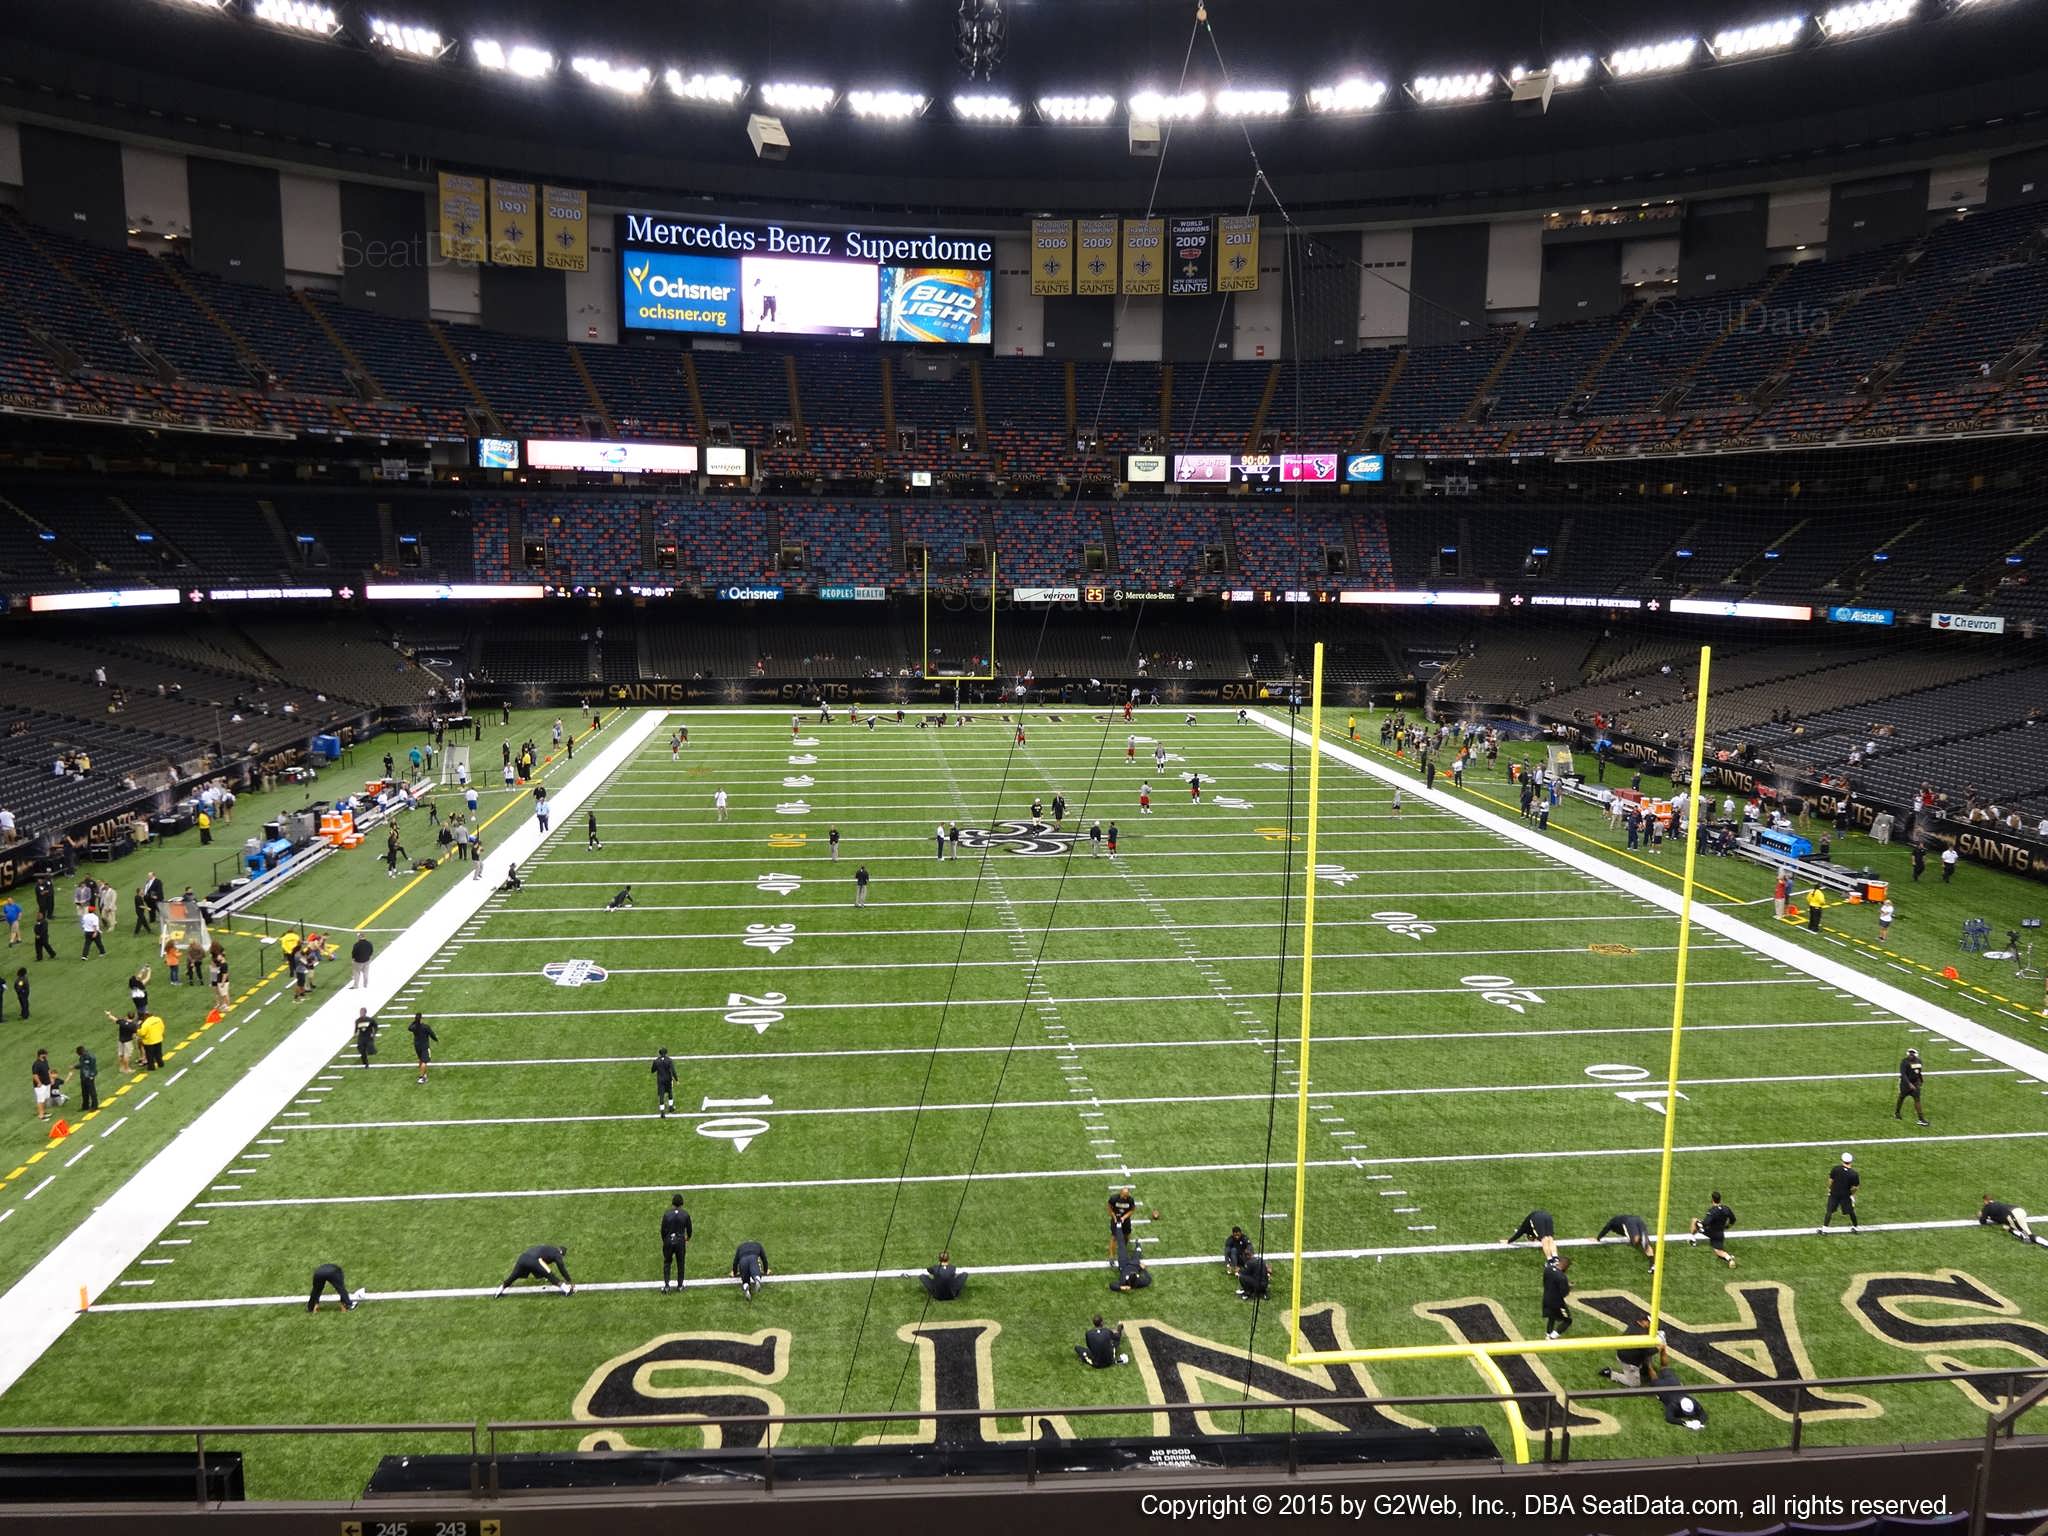 Seat view from section 325 at the Mercedes-Benz Superdome, home of the New Orleans Saints